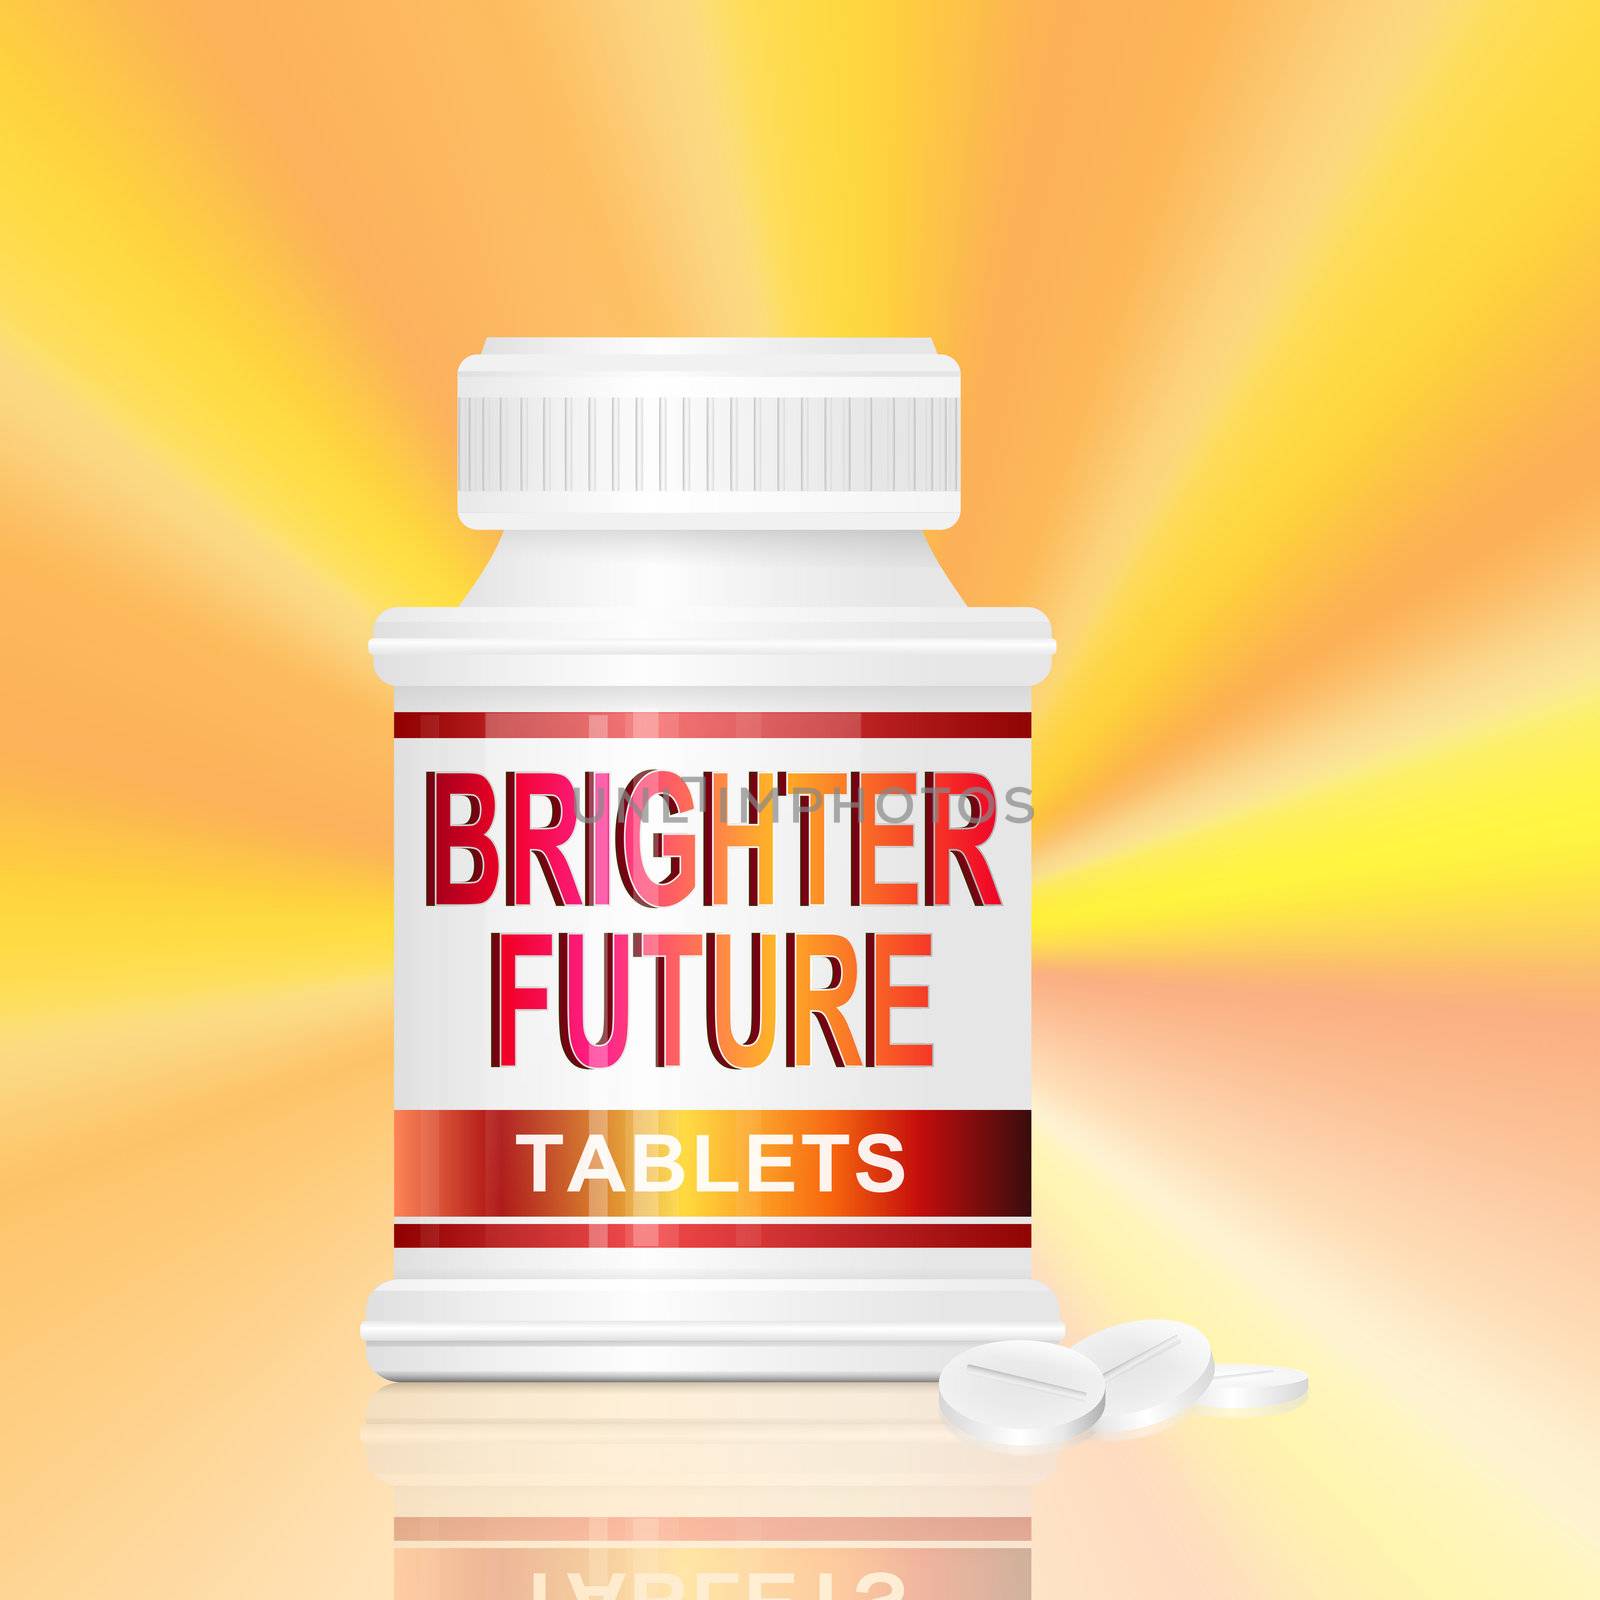 Illustration depicting a single medication container with the words 'brighter future tablets' on the front with golden light effect background and a few tablets in the foreground.